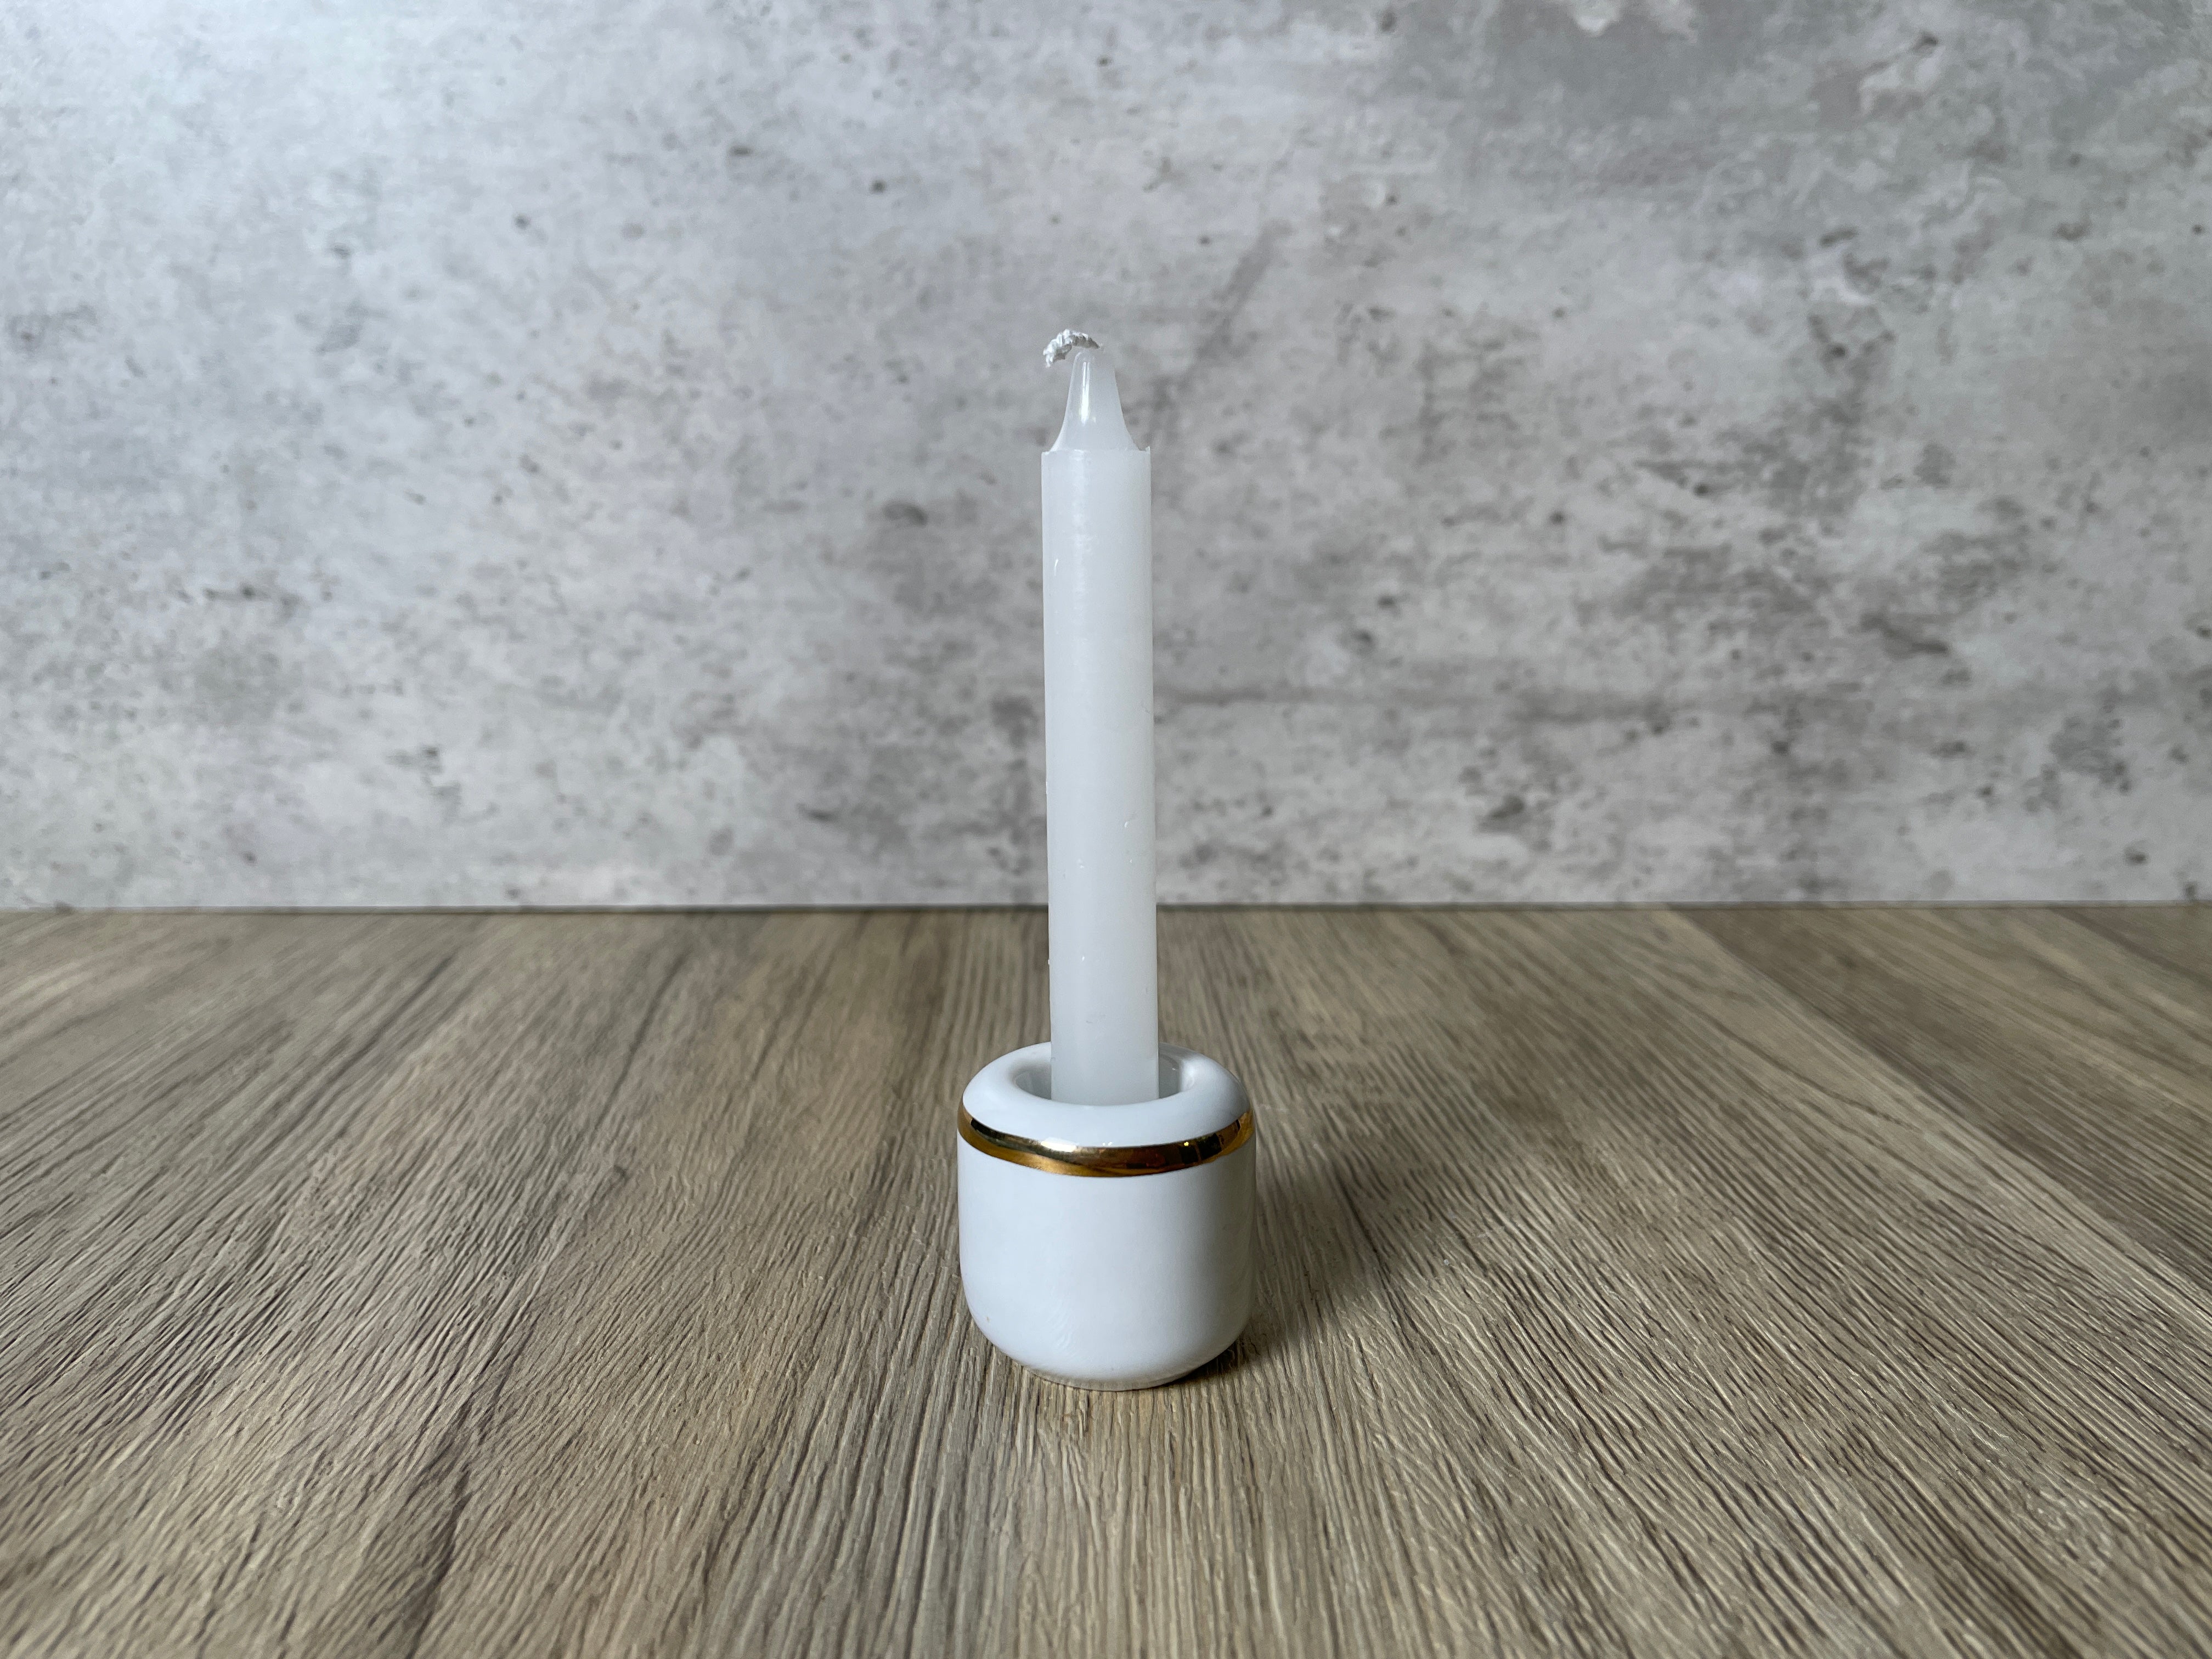 Buy Online Latest and Unique White Chime Candle Holder - Ceramic with Gold Band | Shop Best Spiritual Items - The Mystical Ritual